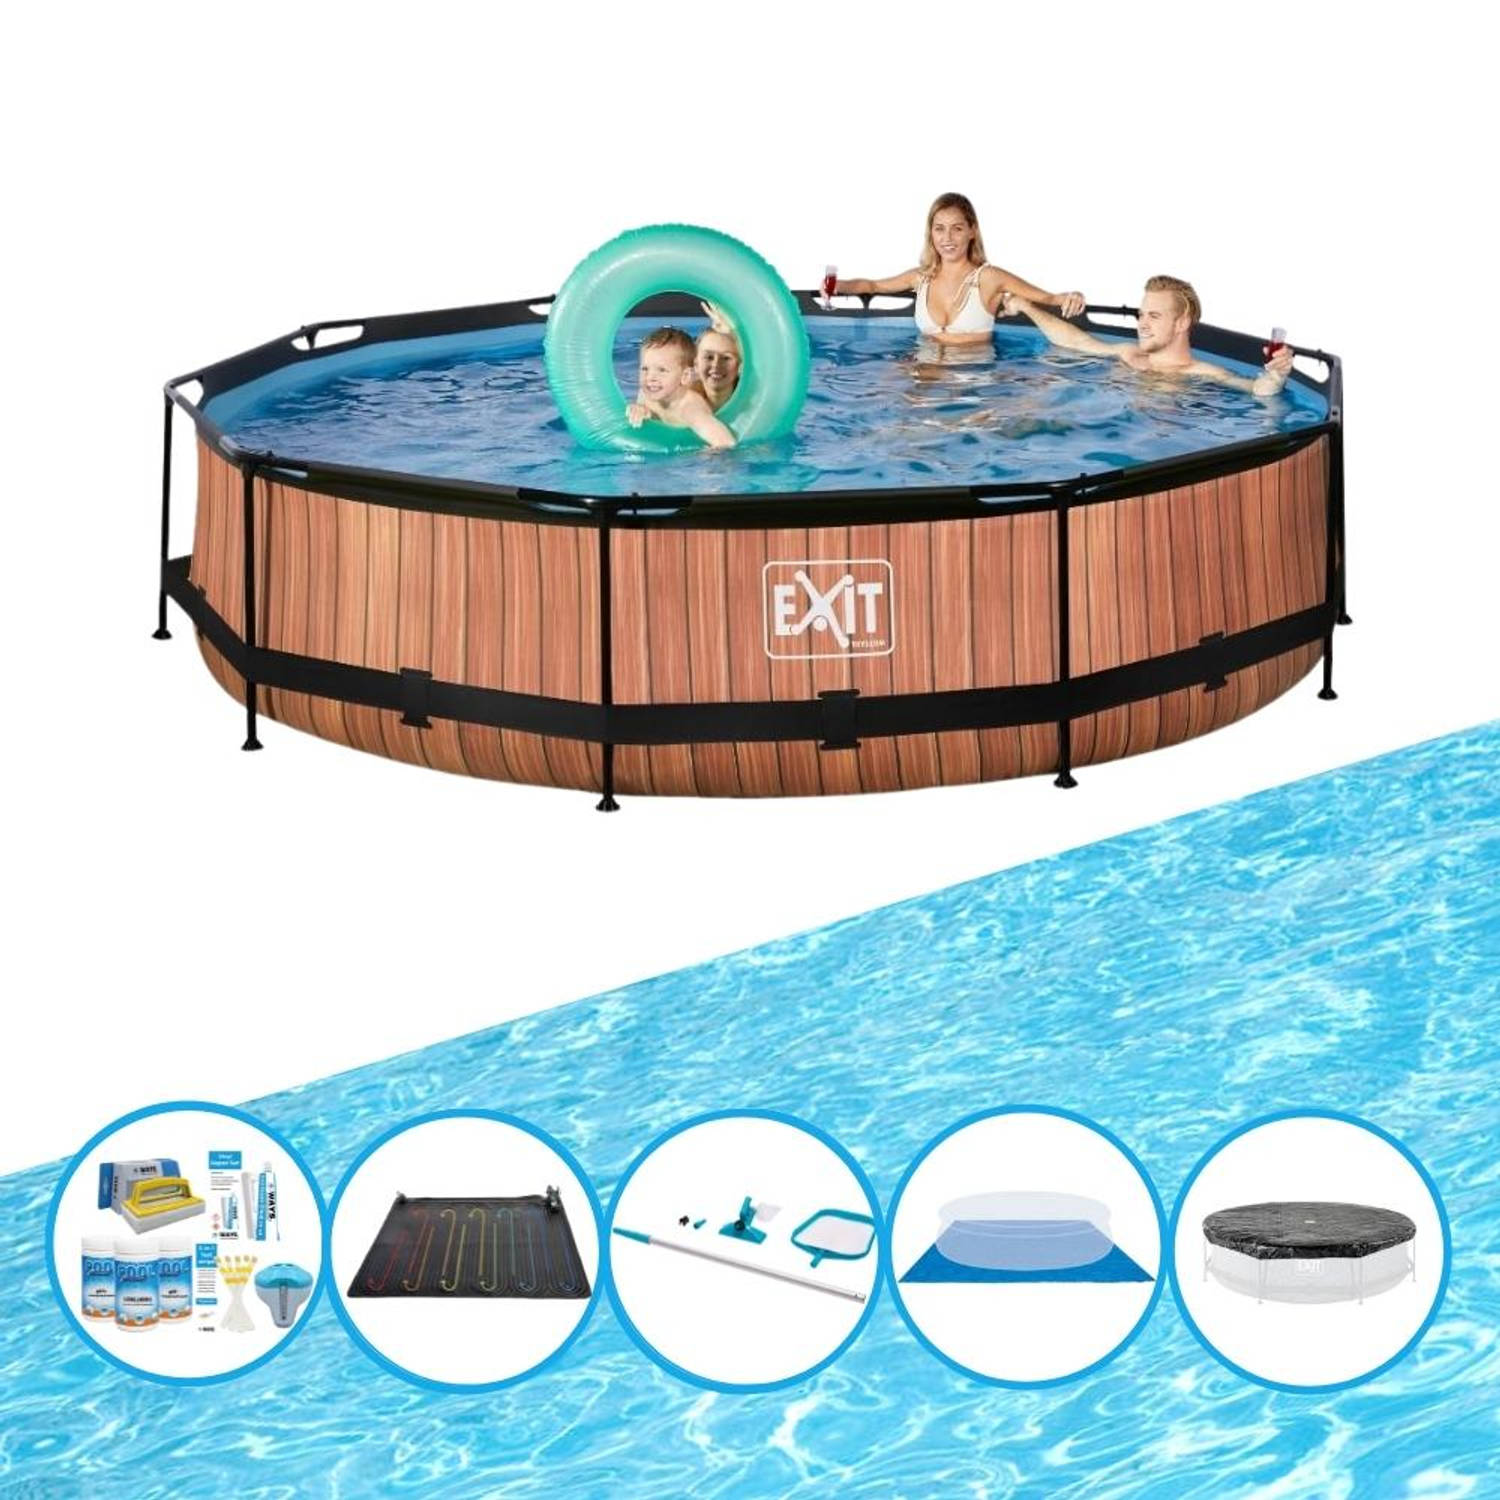 EXIT Toys Exit Zwembad Timber Style - Frame Pool ø360x76cm - Inclusief Accessoires - Bruin